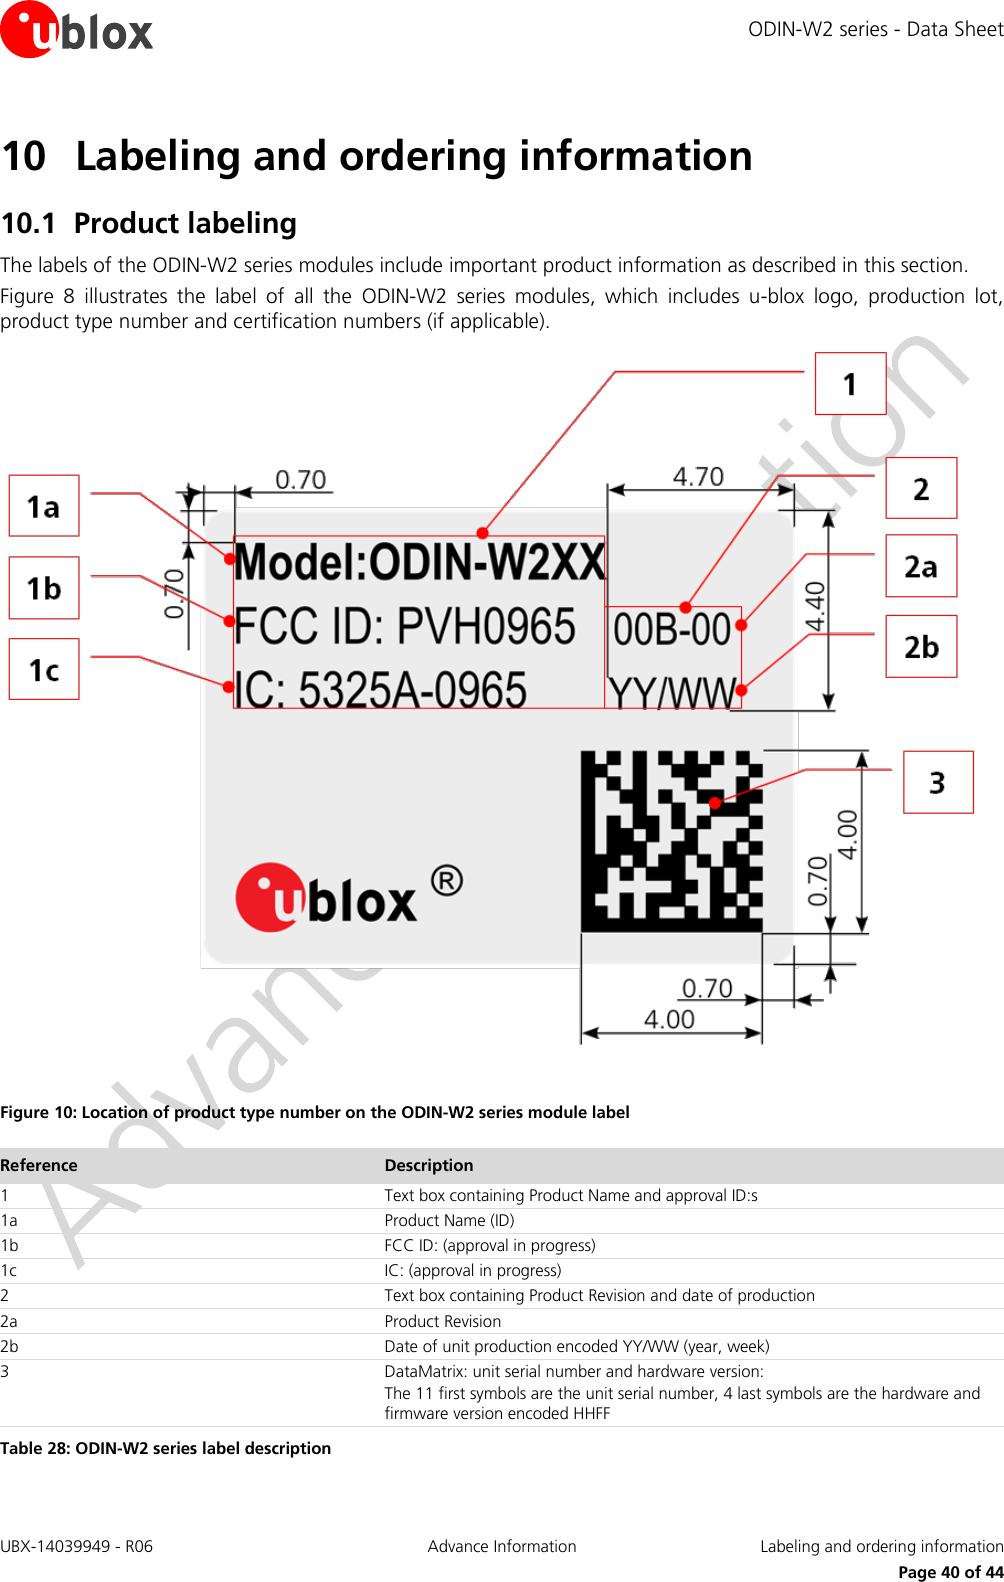 ODIN-W2 series - Data Sheet UBX-14039949 - R06 Advance Information  Labeling and ordering information     Page 40 of 44 10 Labeling and ordering information 10.1 Product labeling The labels of the ODIN-W2 series modules include important product information as described in this section. Figure  8  illustrates  the  label  of  all  the  ODIN-W2  series  modules,  which  includes  u-blox  logo,  production  lot, product type number and certification numbers (if applicable).   Figure 10: Location of product type number on the ODIN-W2 series module label Reference Description 1 Text box containing Product Name and approval ID:s 1a Product Name (ID) 1b FCC ID: (approval in progress) 1c IC: (approval in progress) 2 Text box containing Product Revision and date of production 2a Product Revision 2b Date of unit production encoded YY/WW (year, week) 3 DataMatrix: unit serial number and hardware version: The 11 first symbols are the unit serial number, 4 last symbols are the hardware and firmware version encoded HHFF Table 28: ODIN-W2 series label description 